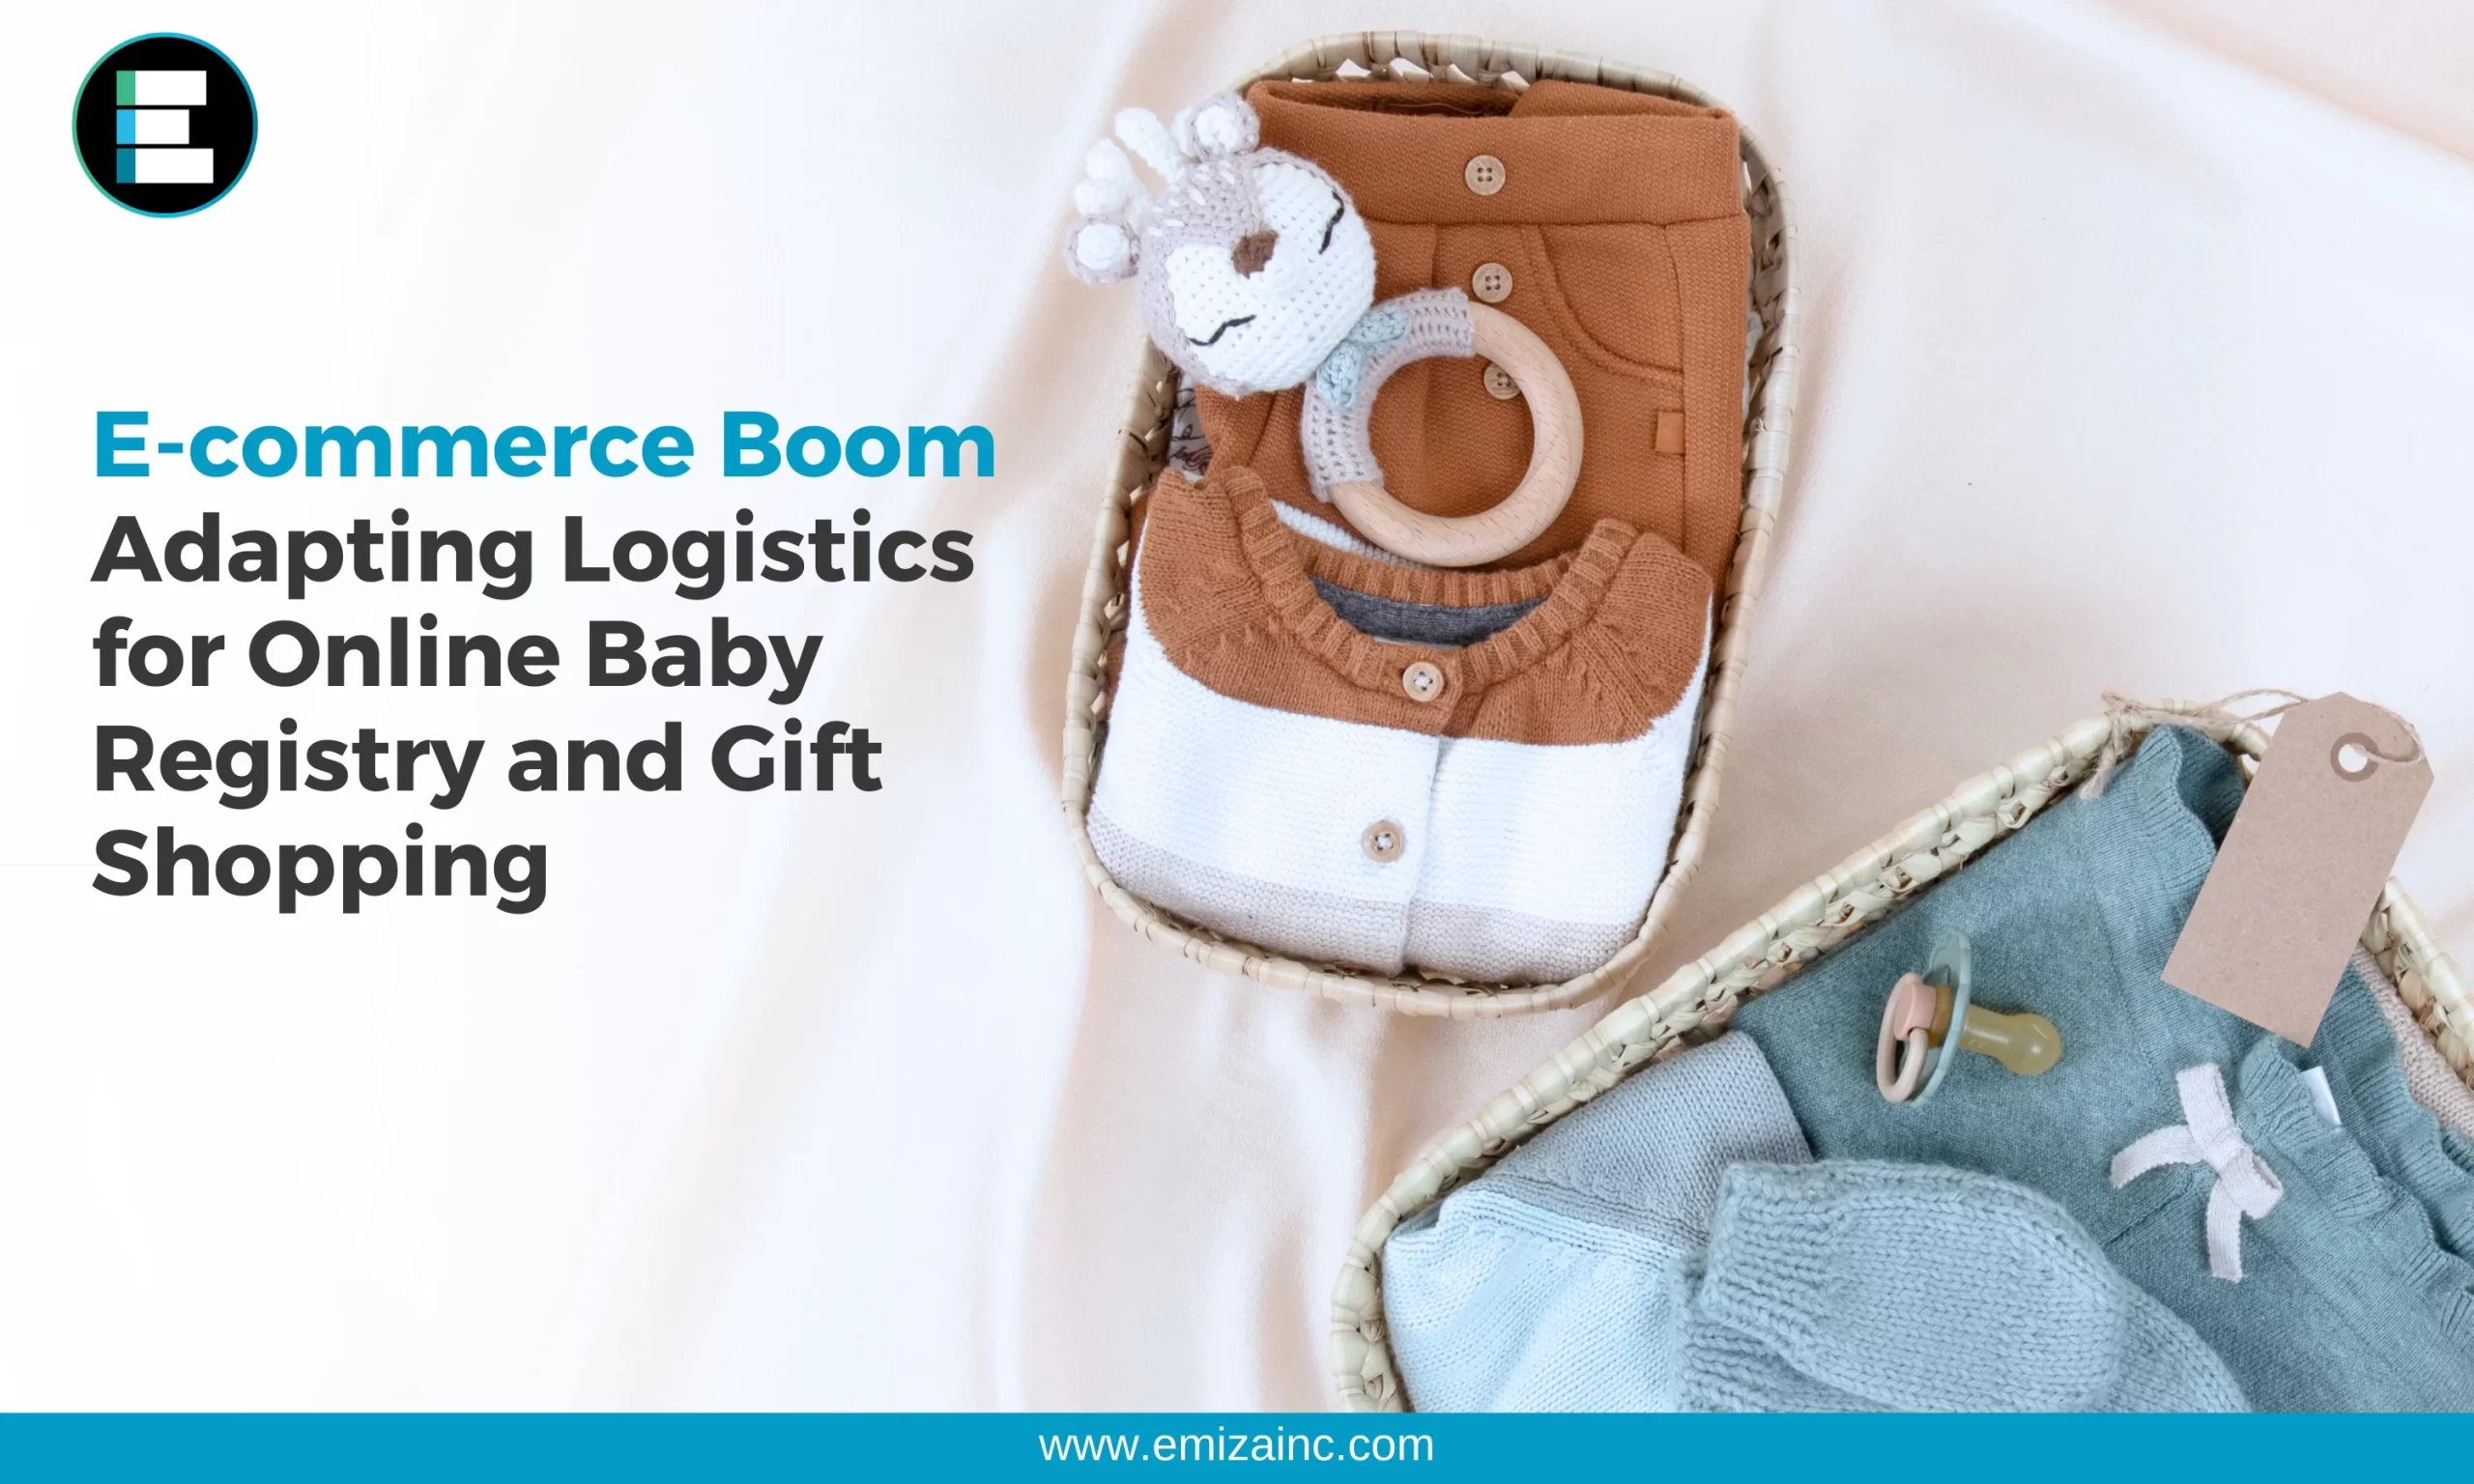 E-commerce Boom Adapting Logistics for Online Baby Registry and Gift Shopping